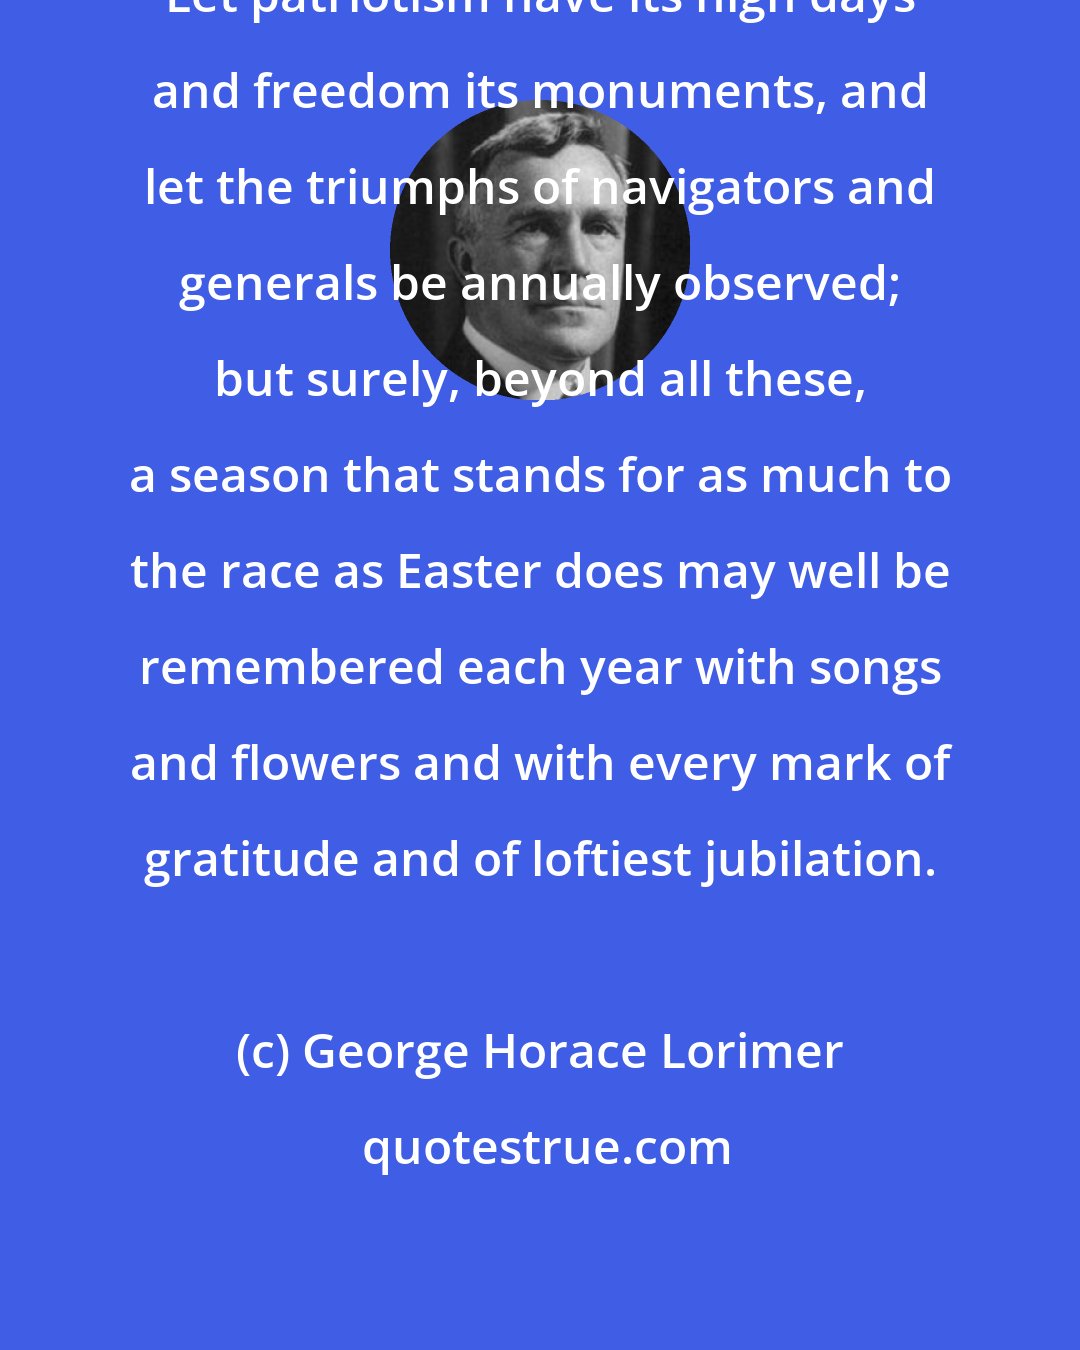 George Horace Lorimer: Let patriotism have its high days and freedom its monuments, and let the triumphs of navigators and generals be annually observed; but surely, beyond all these, a season that stands for as much to the race as Easter does may well be remembered each year with songs and flowers and with every mark of gratitude and of loftiest jubilation.